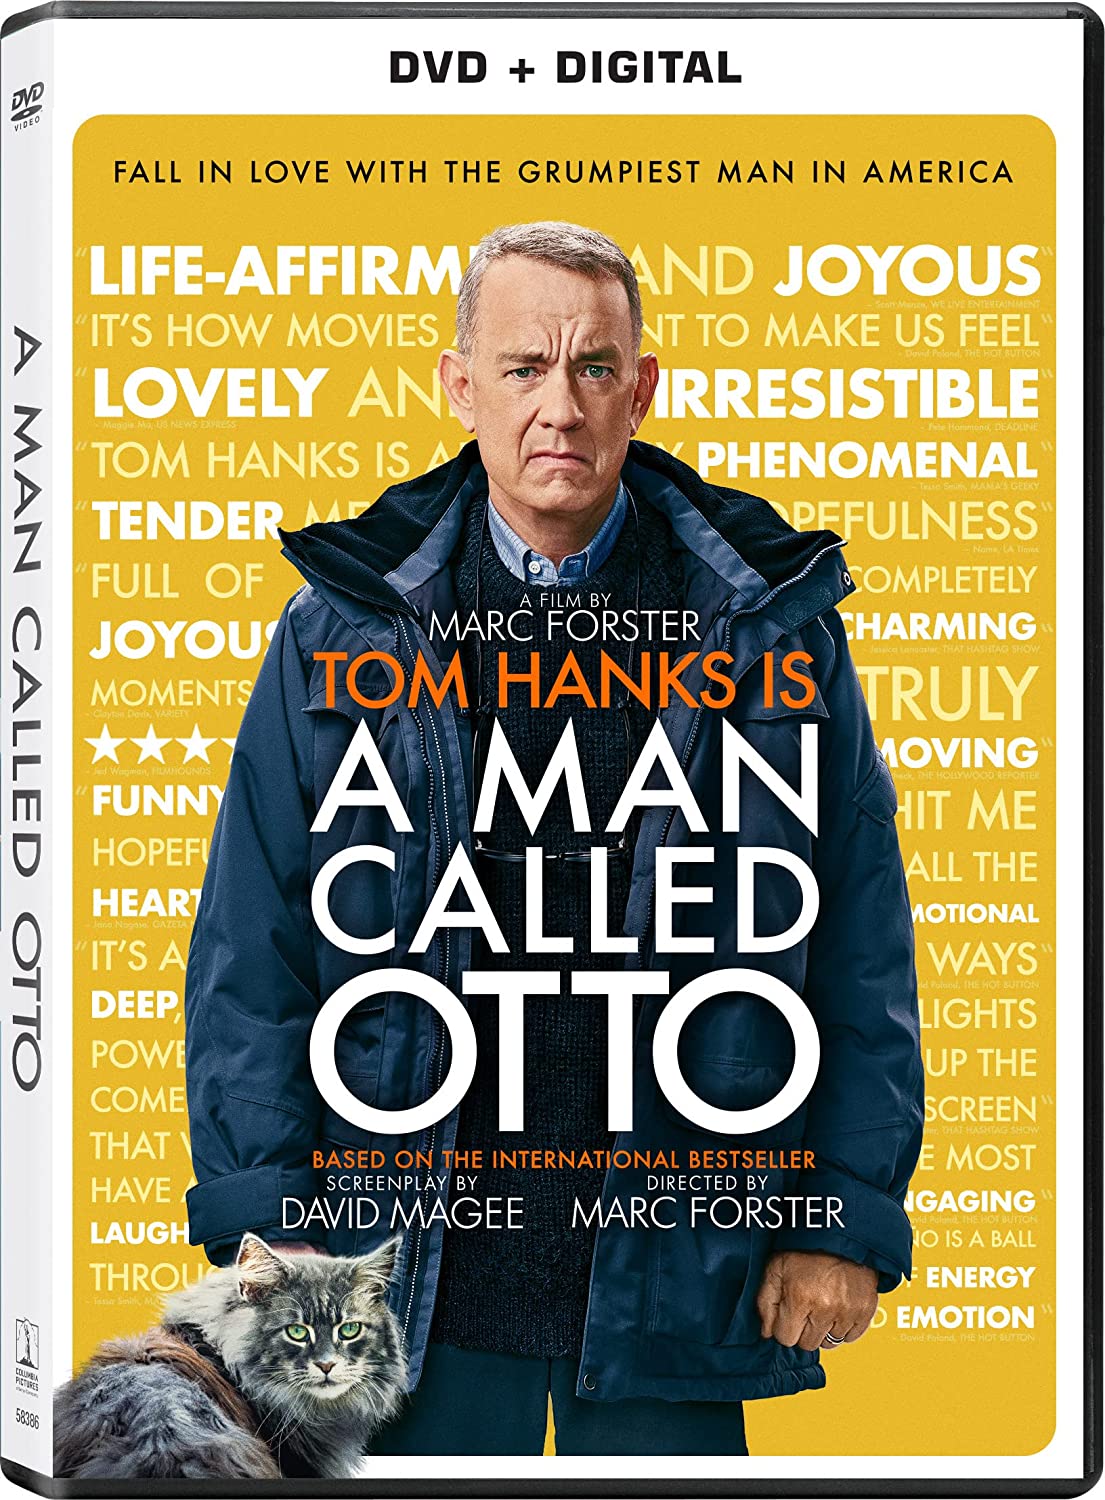 Image for "A Man Called Otto"